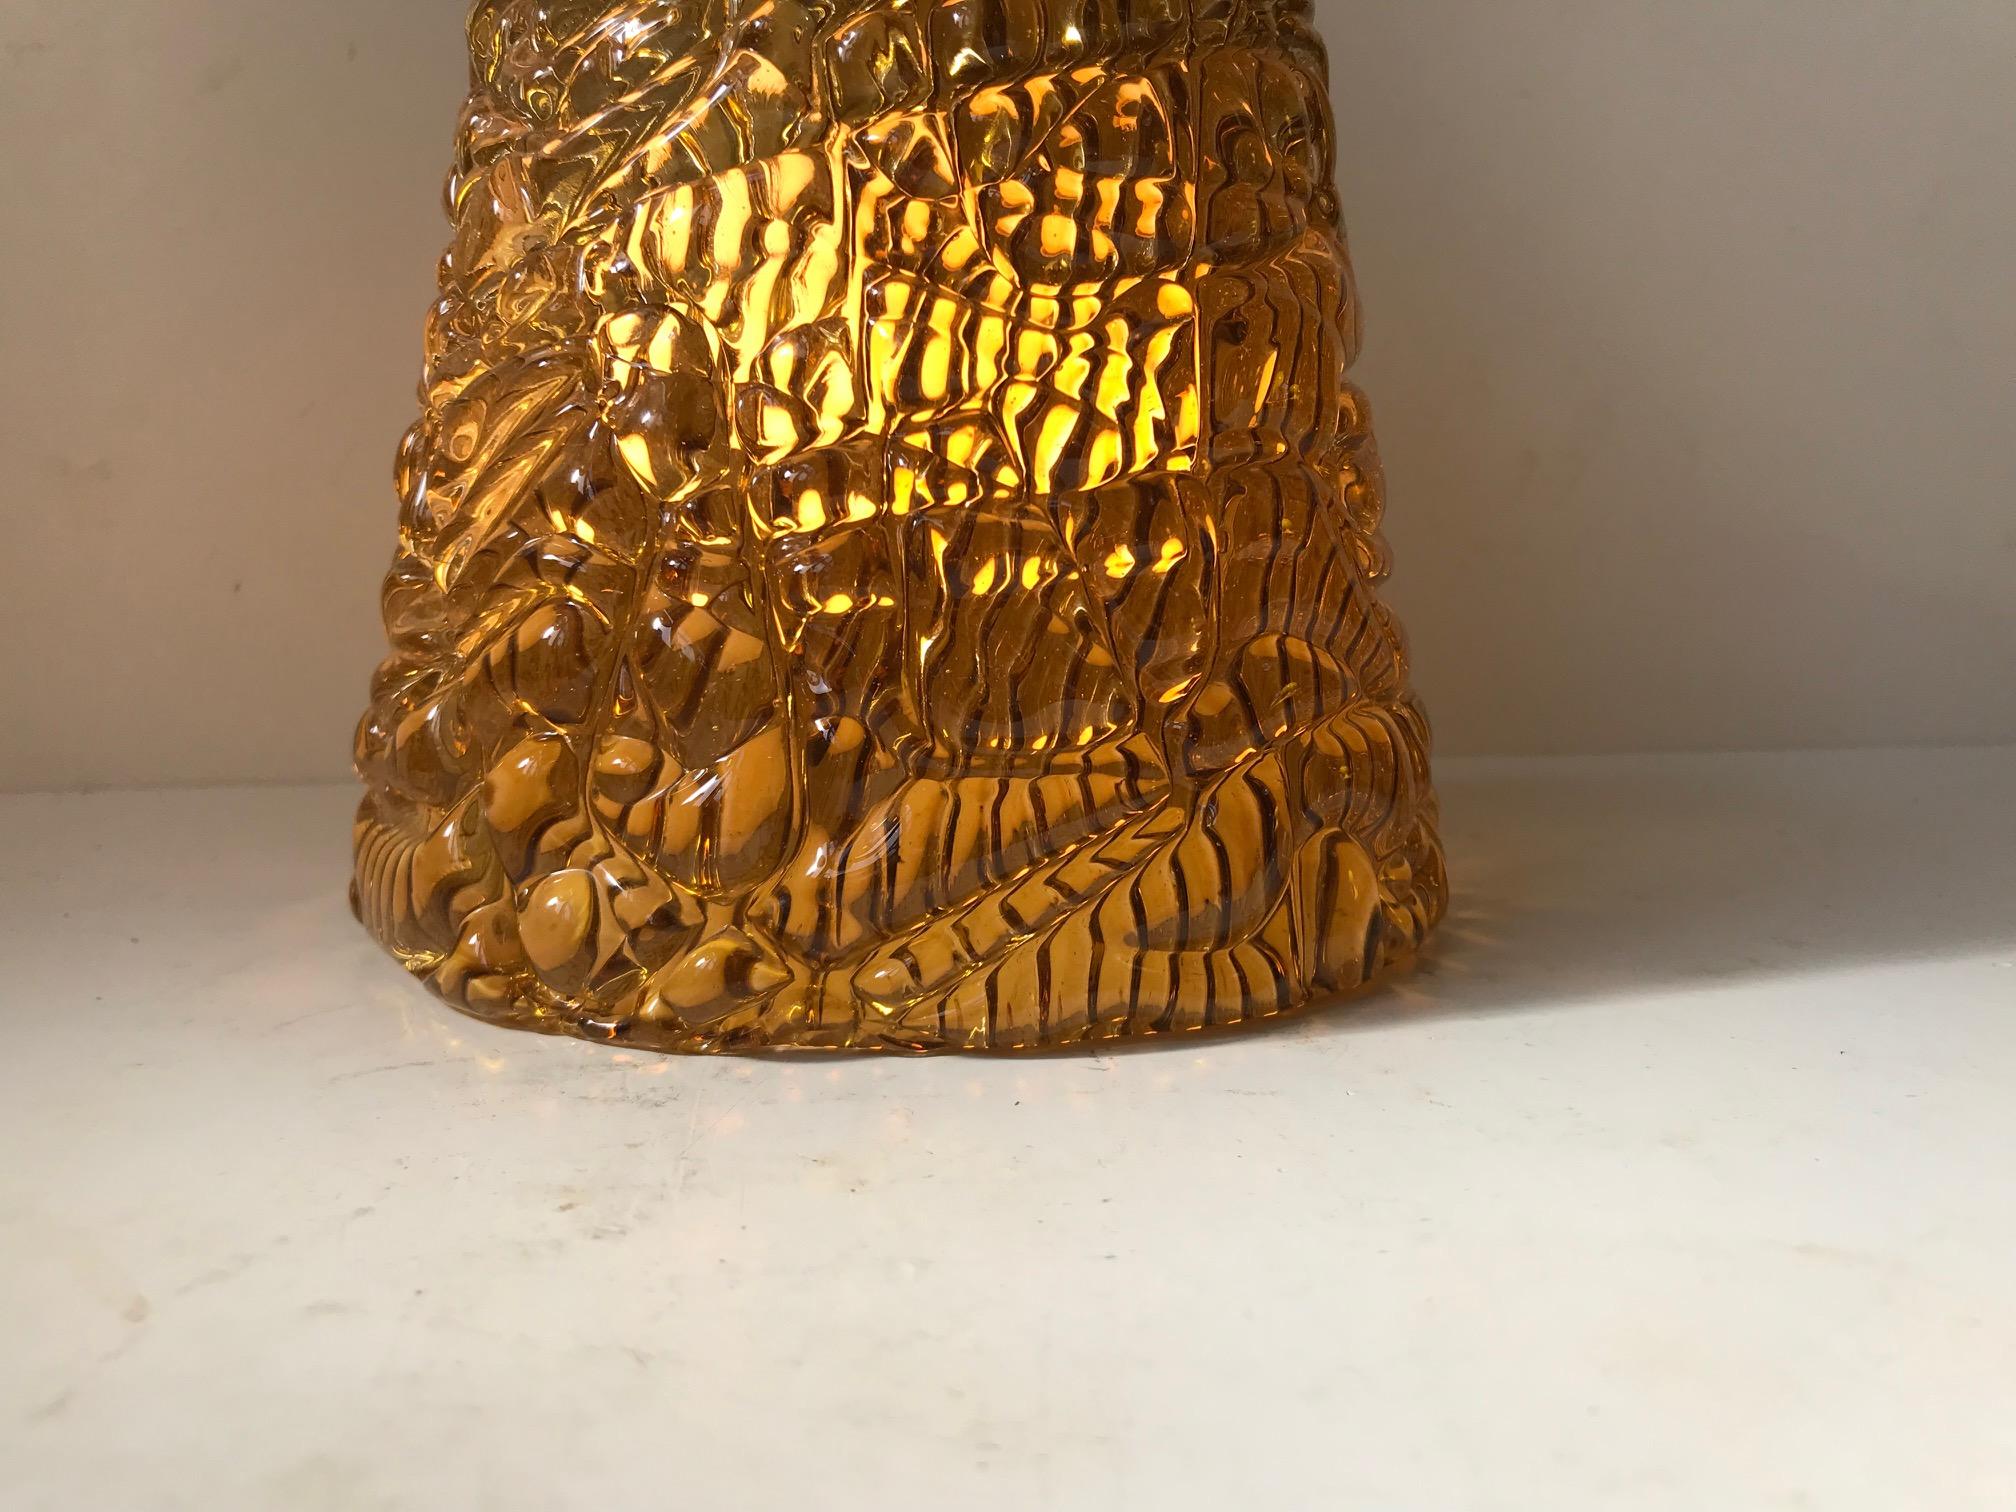 A rare semi-conical hanging light designed by Carl Fagerlund and manufactured by Orrefors in Sweden during the 1960s. The thick textured golden honey colored crystal glass is kept in place by 3 brass screw connected to a brass center stem/pole. Its